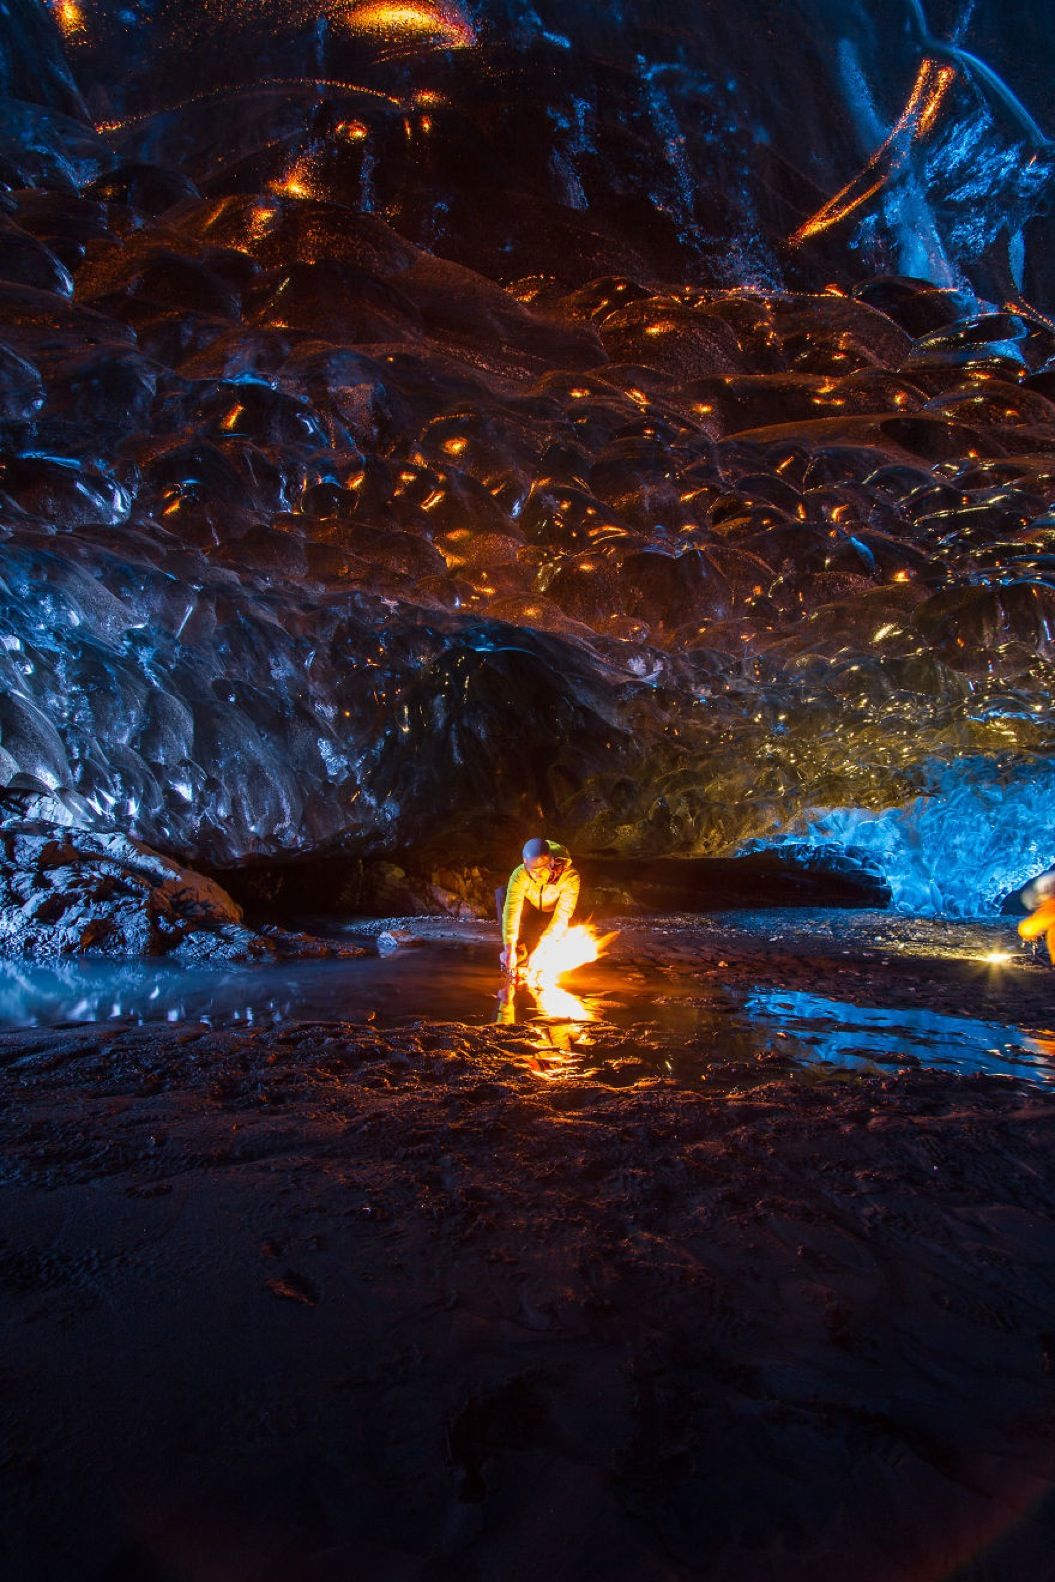 85singo_I-finally-visited-the-ice-caves-in-Iceland28__880